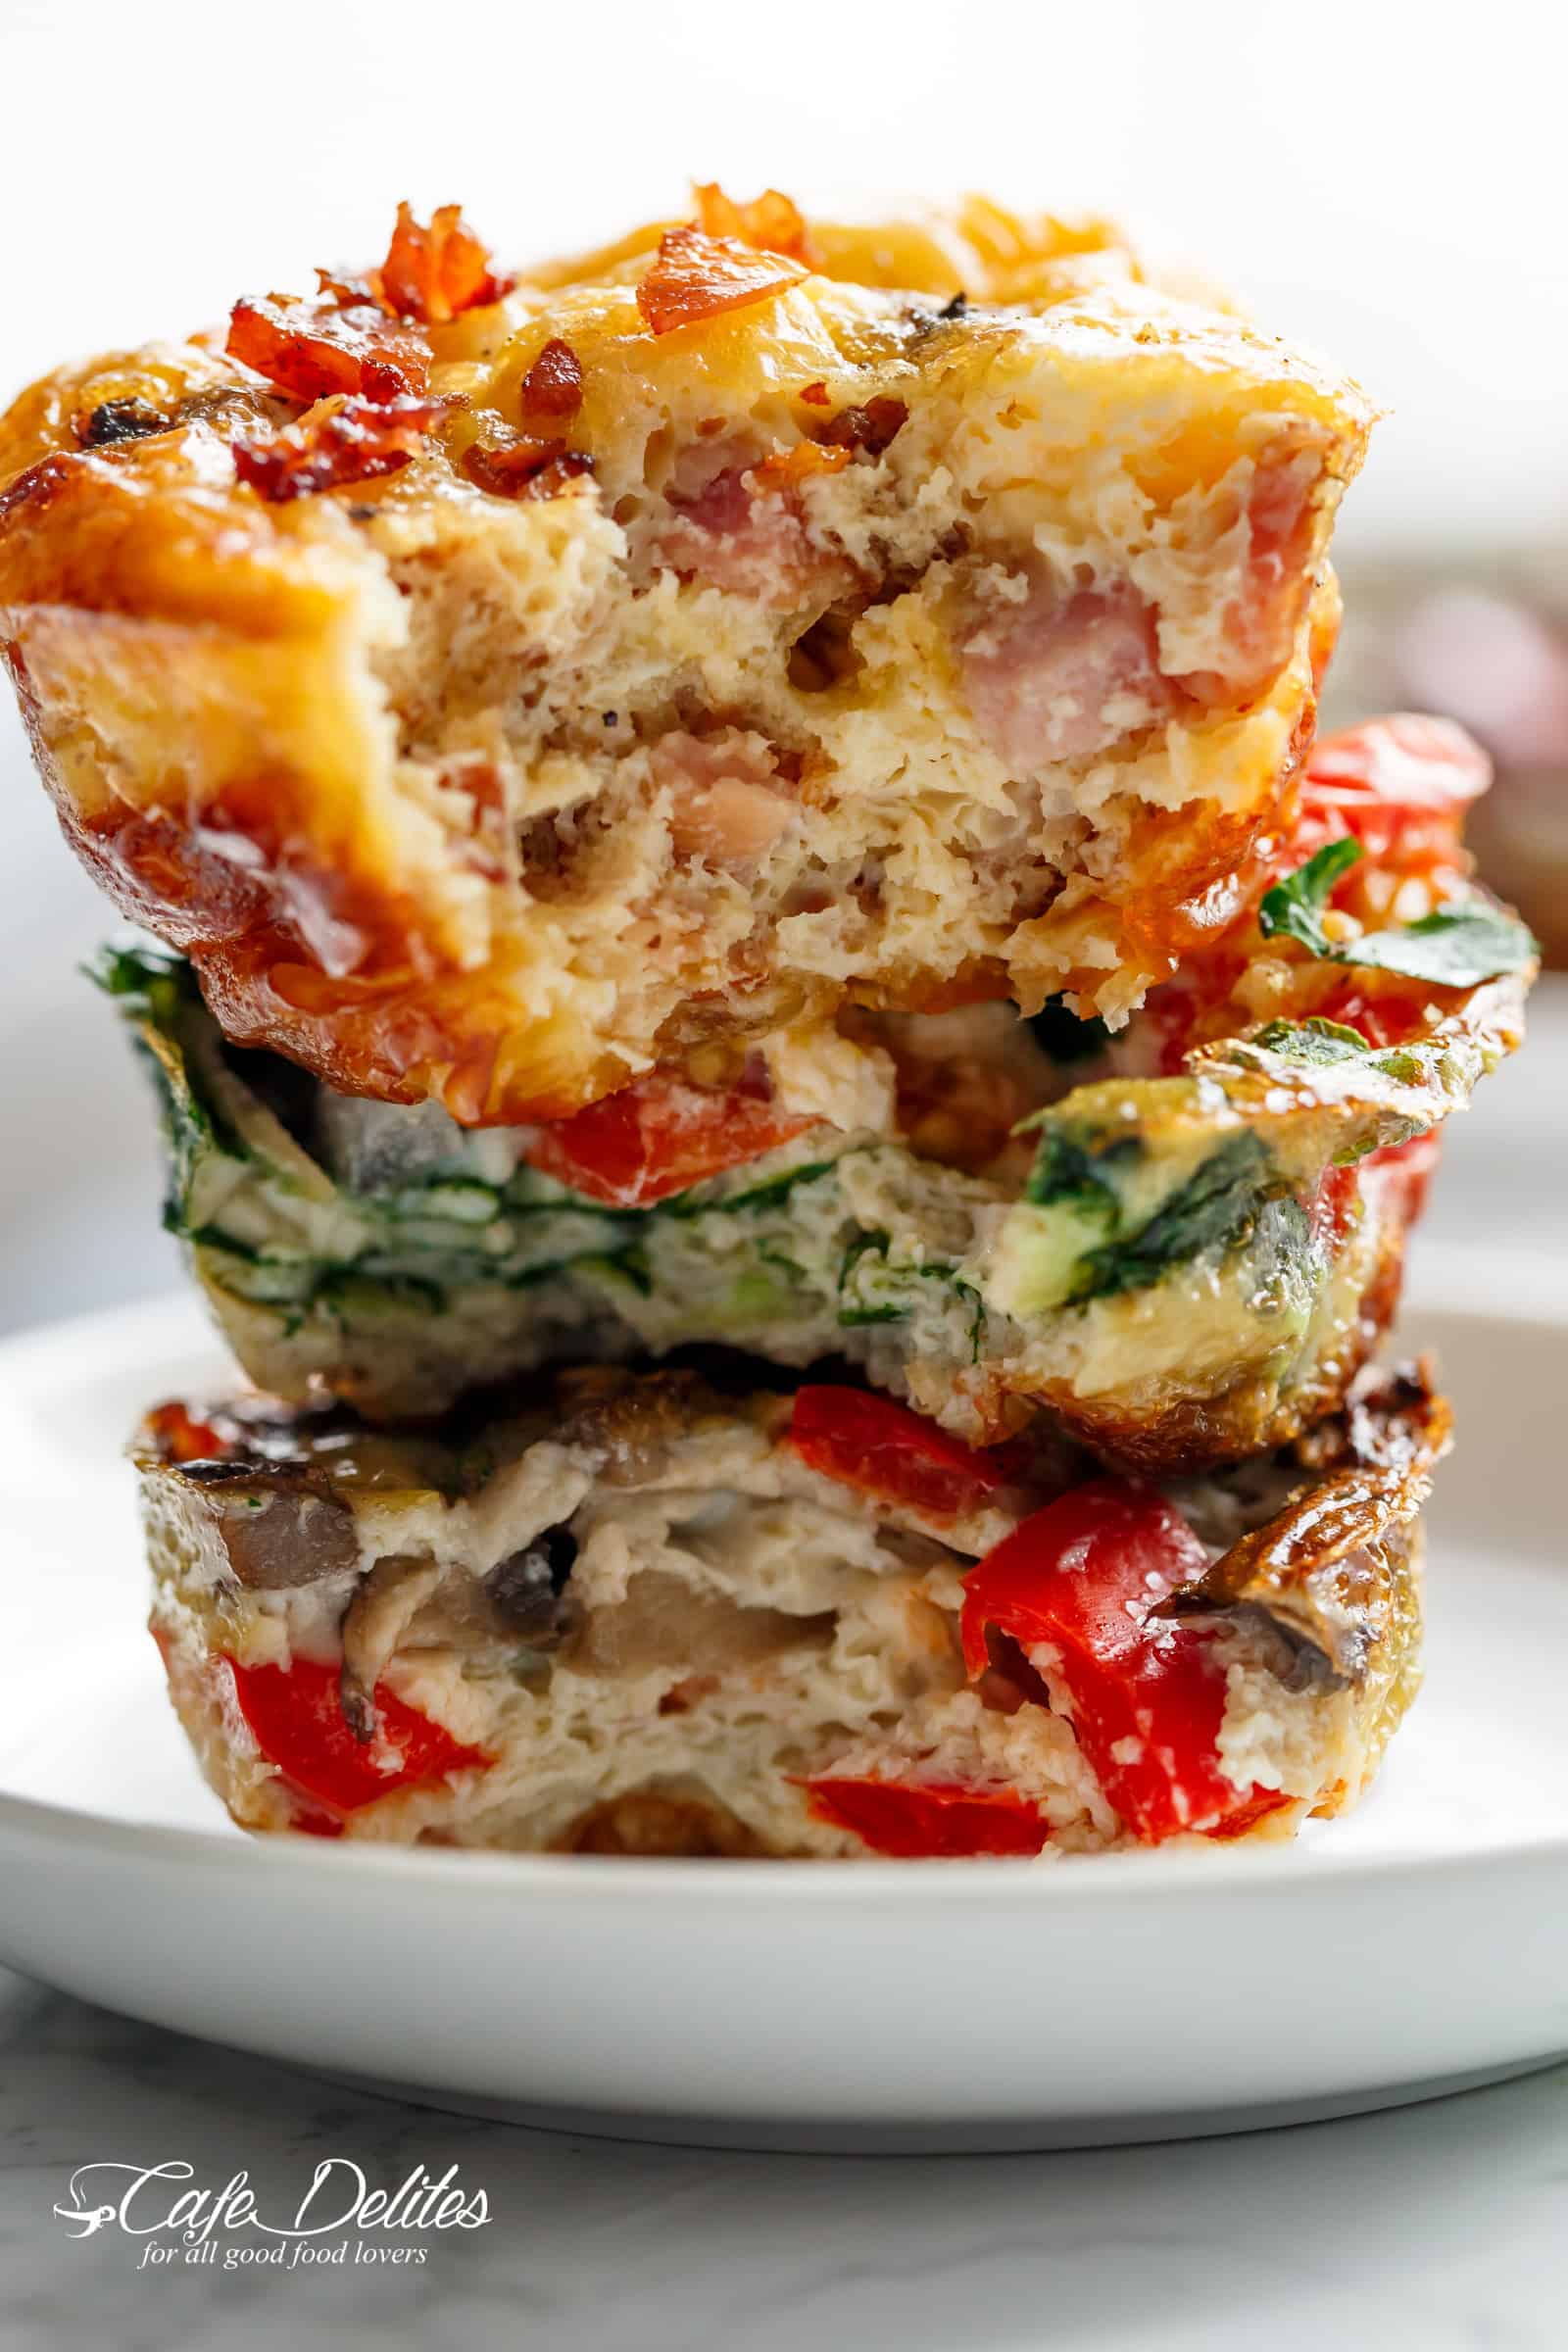 Breakfast Egg Muffins 3 Ways are low carb, filling and quick to grab while running out of the door! | cafedelites.com